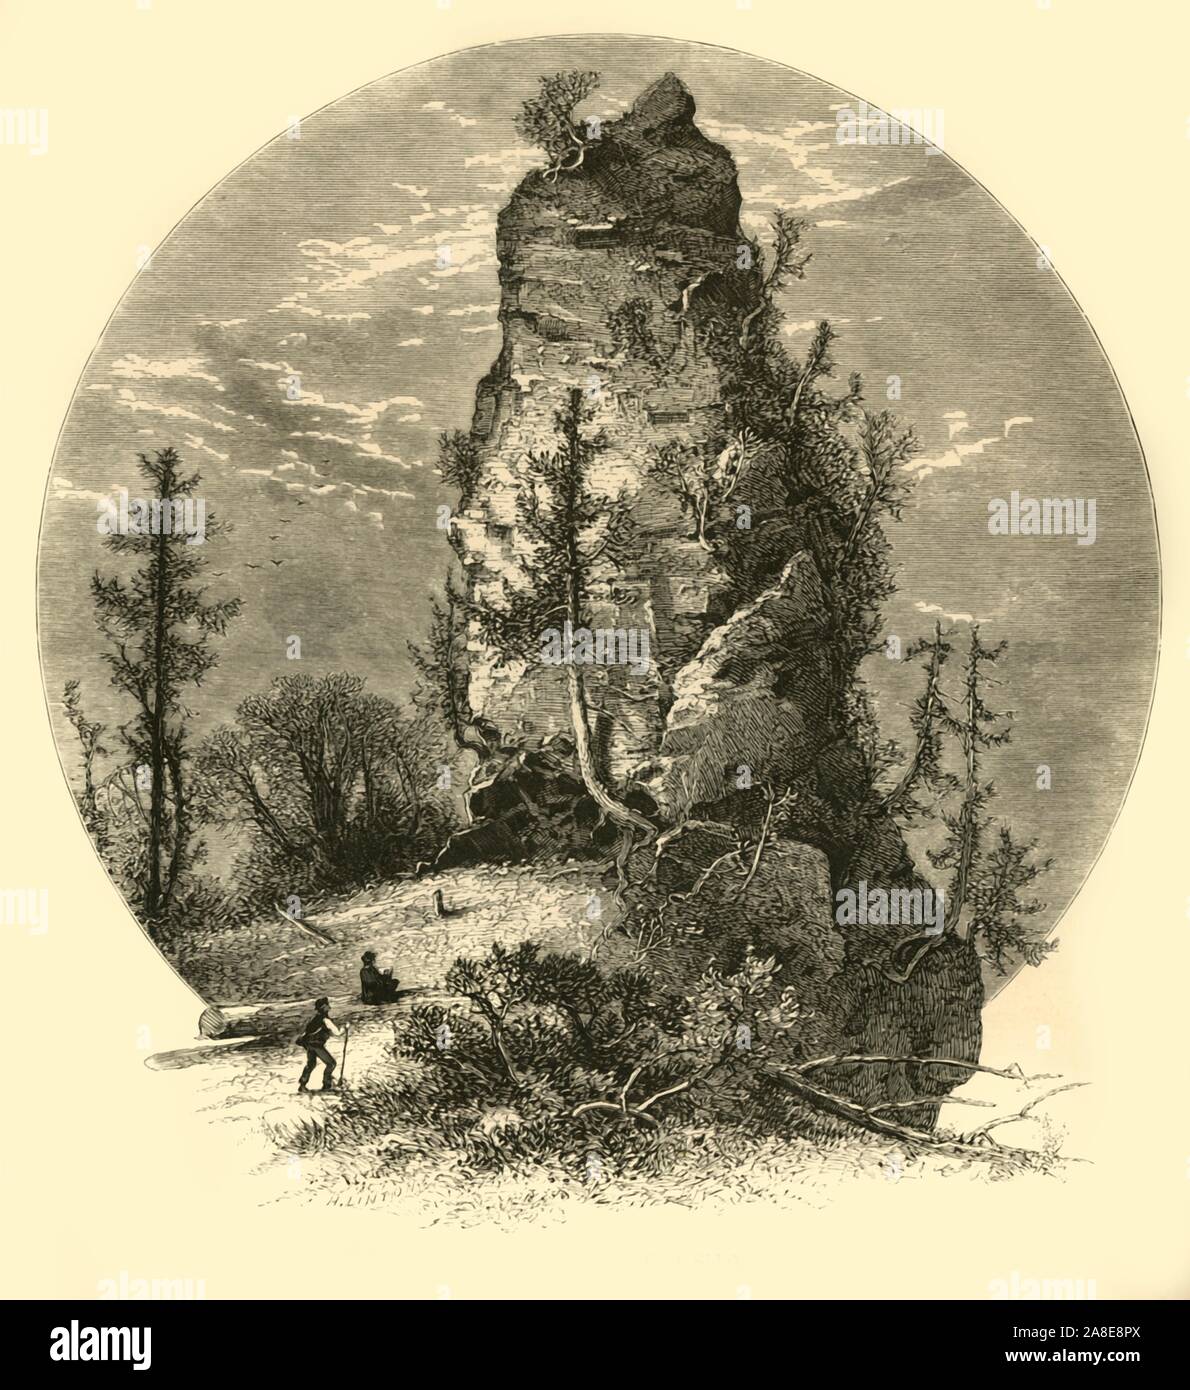 'Sugar-Loaf Rock - (East Side)', 1872. 75-foot-high rock stack formed by post-glacial erosion on Mackinac Island, Lake Huron, Michigan, USA. From &quot;Picturesque America; or, The Land We Live In, A Delineation by Pen and Pencil of the Mountains, Rivers, Lakes...with Illustrations on Steel and Wood by Eminent American Artists&quot; Vol. I, edited by William Cullen Bryant. [D. Appleton and Company, New York, 1872] Stock Photo